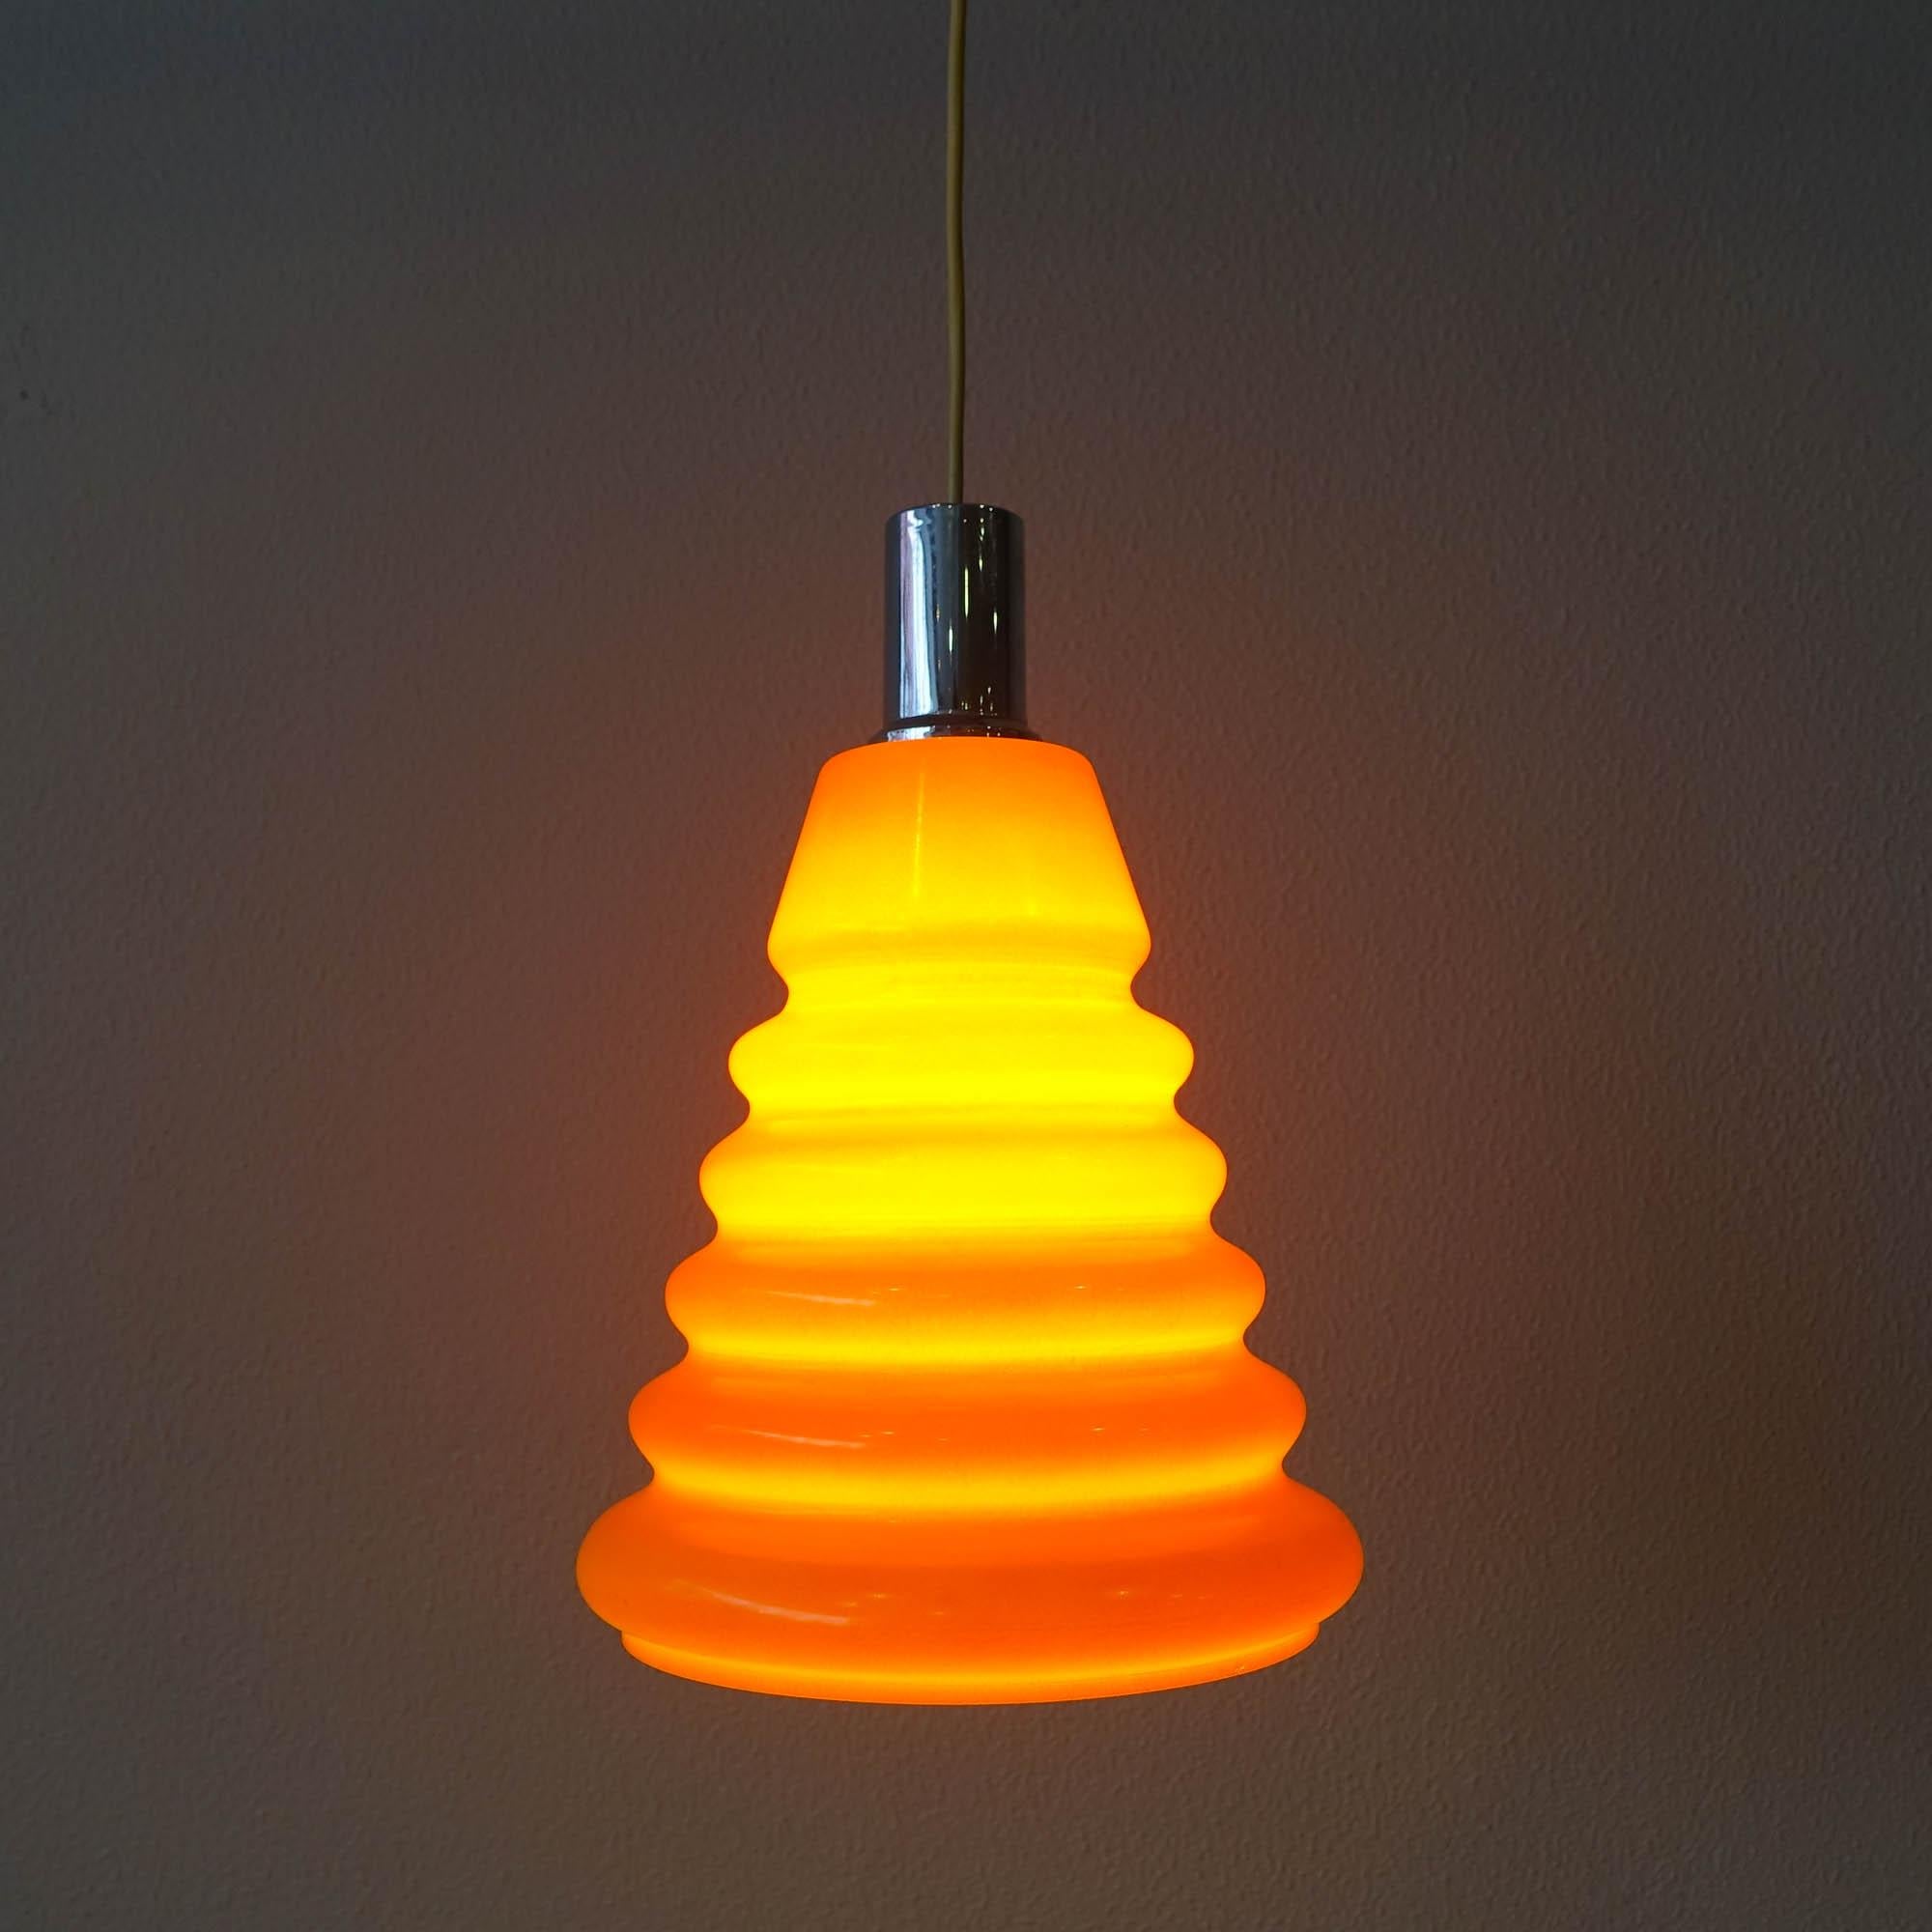 This pendant lamp was design and produced by Marinha Grande, in Portugal, during the 1960's. It is made in an orange opaline glass with all the original chrome metal parts. In original and good condition.